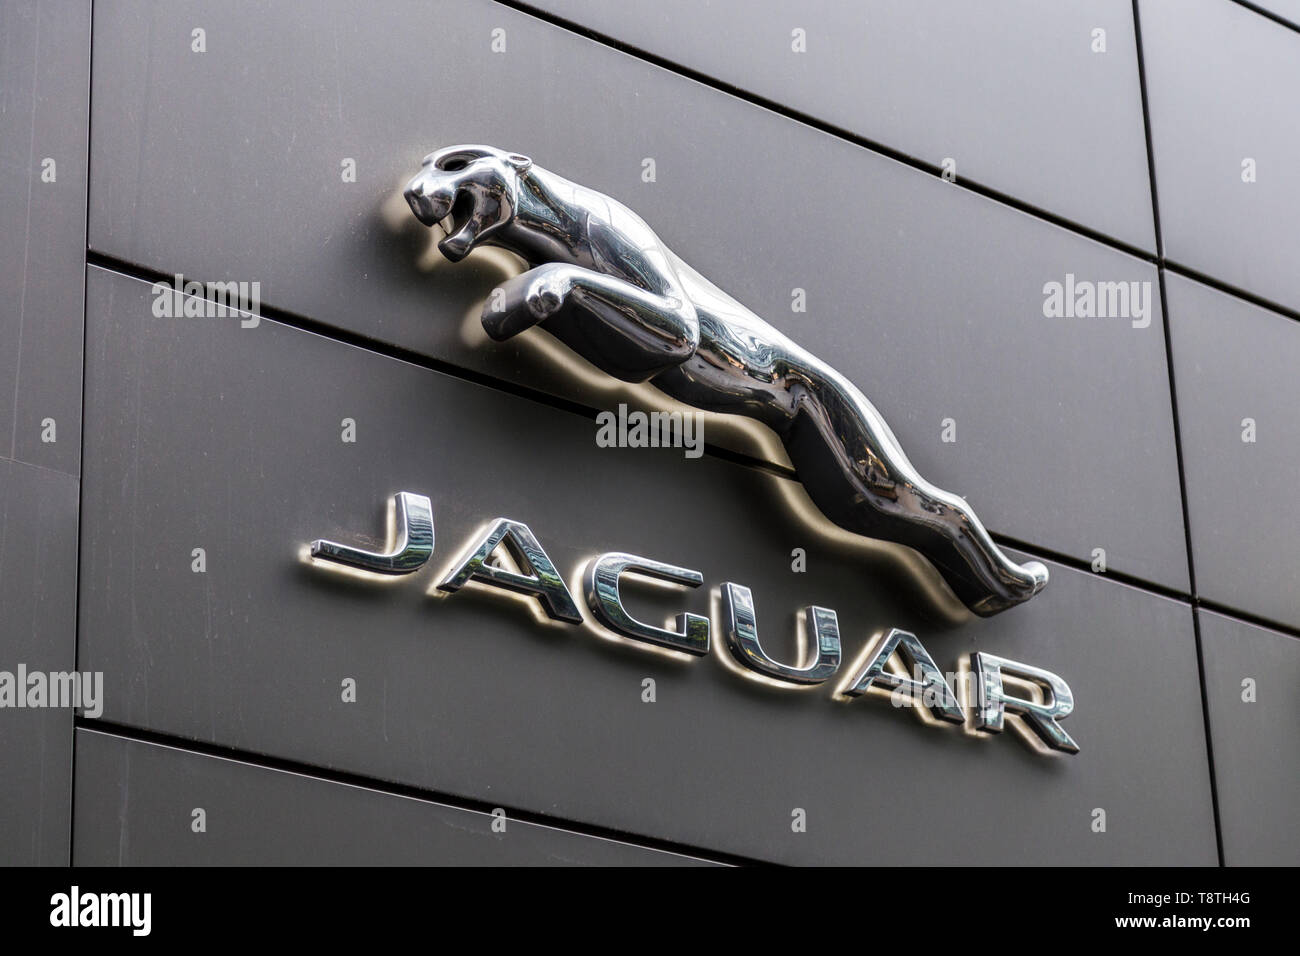 Logo of Jaguar luxury and sports car brand above the shop in Westfield Stratford, London, UK Stock Photo